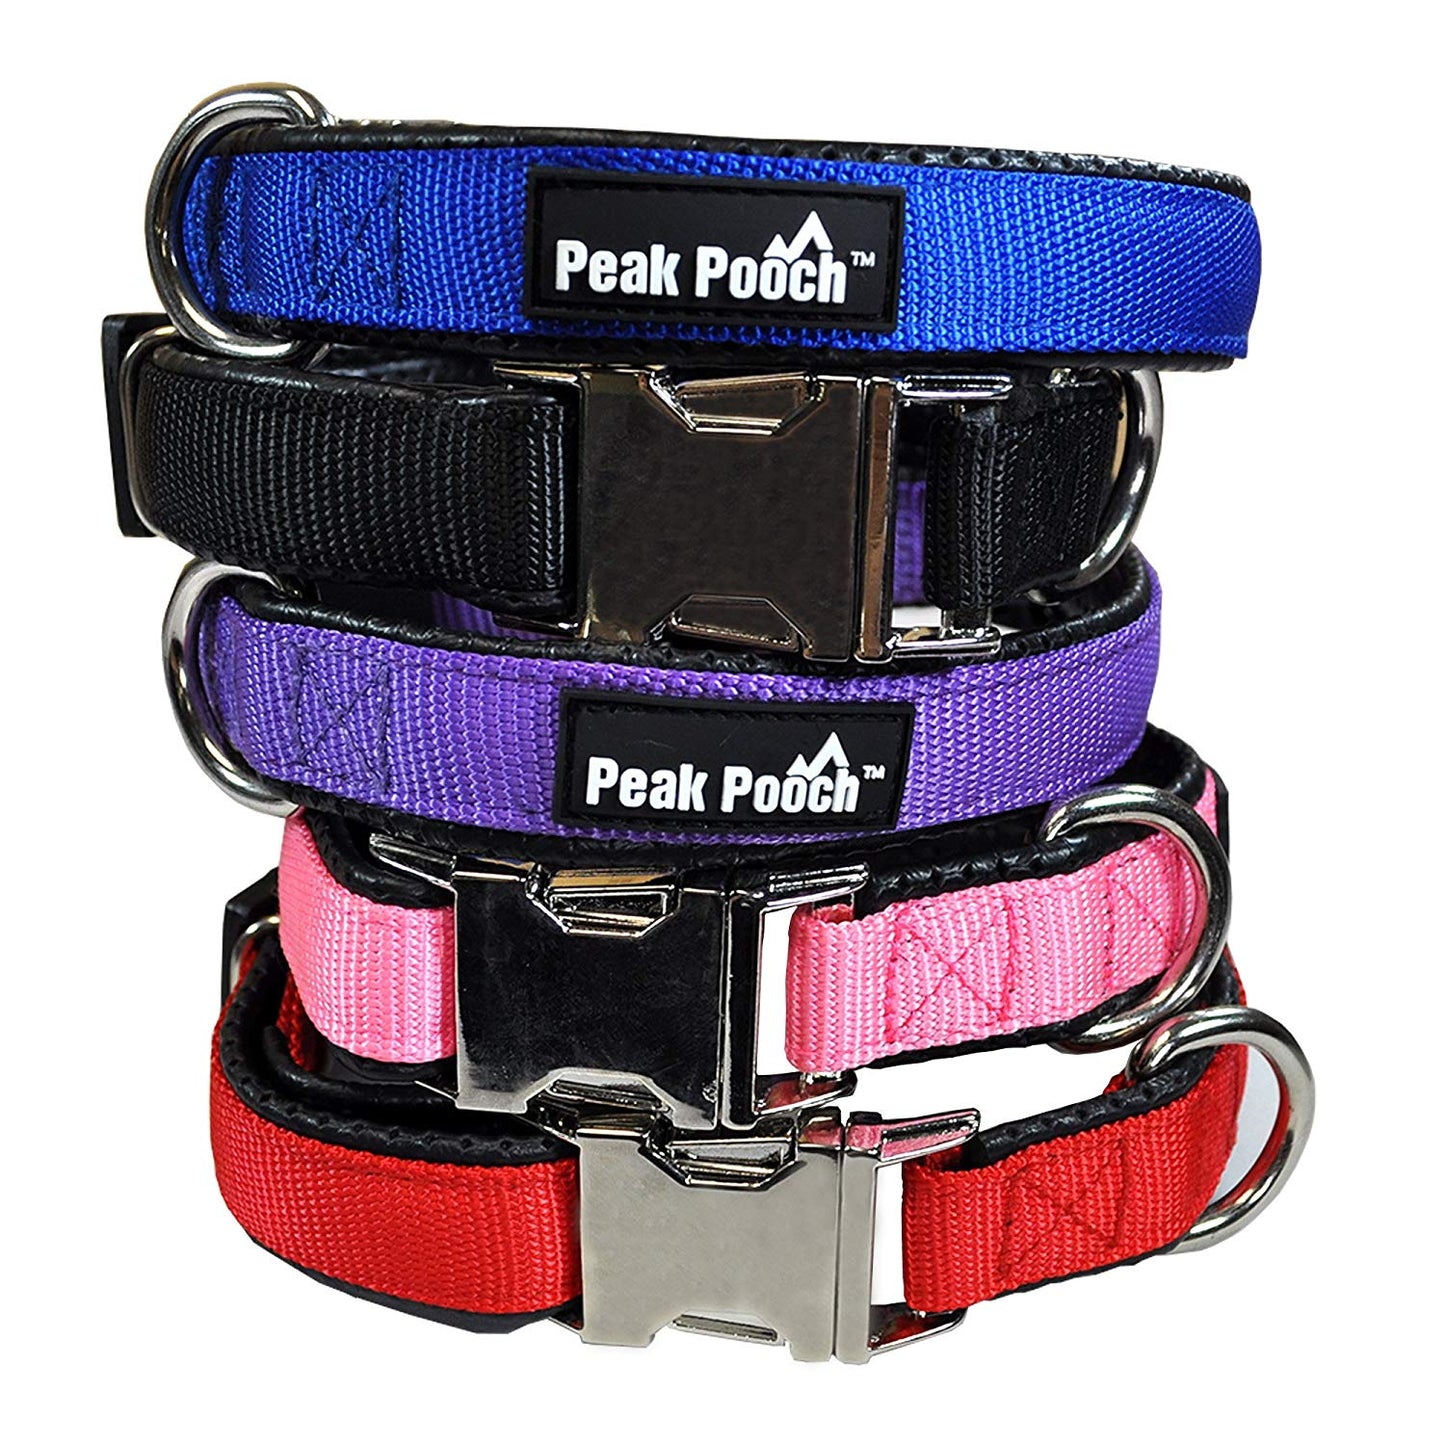 Adjustable Quick Release Dog Collar - Multi-Size and Color Options